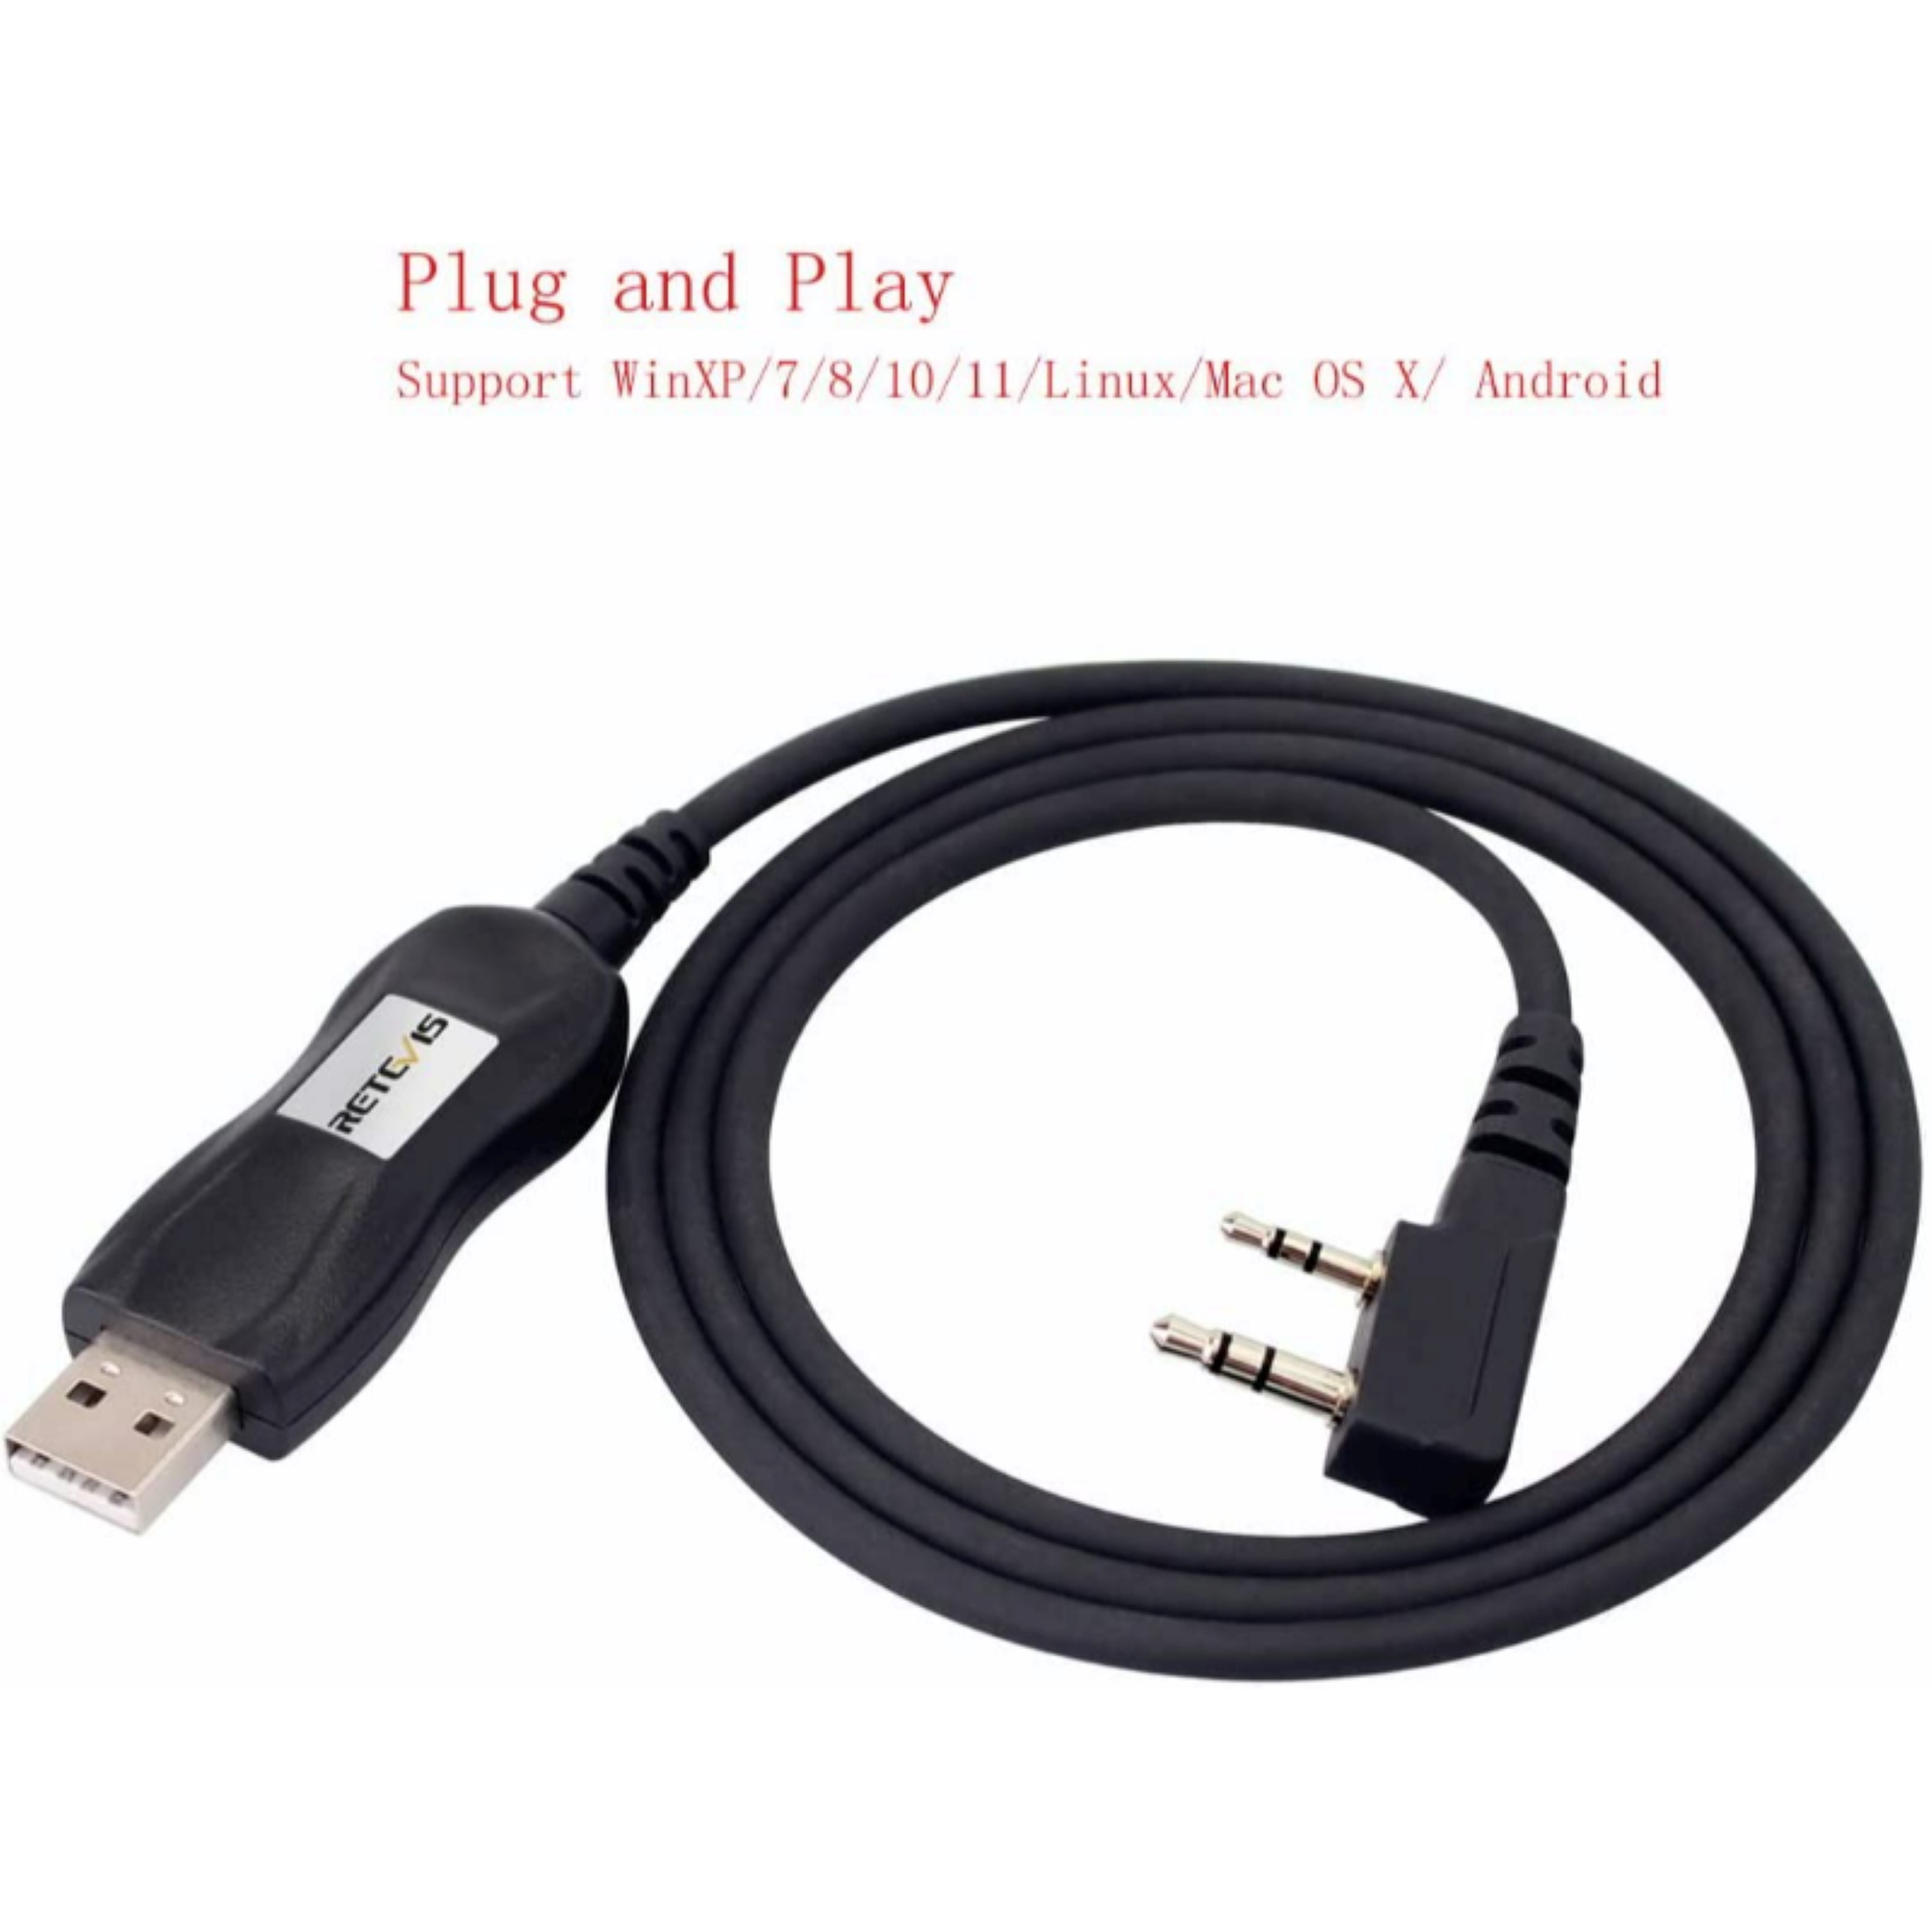 Retevis Retevis Ftdi Usb Programming Cable Way Radio Programming Cable  Compatible Baofeng Uv-5r Bf-888s Bf-F8hp Retevis H-777 Rt21 Rt22 H-777s  Rt27 Arcshell Ar-5 Walkie Talkies1 Pack Wholesale Tradeling